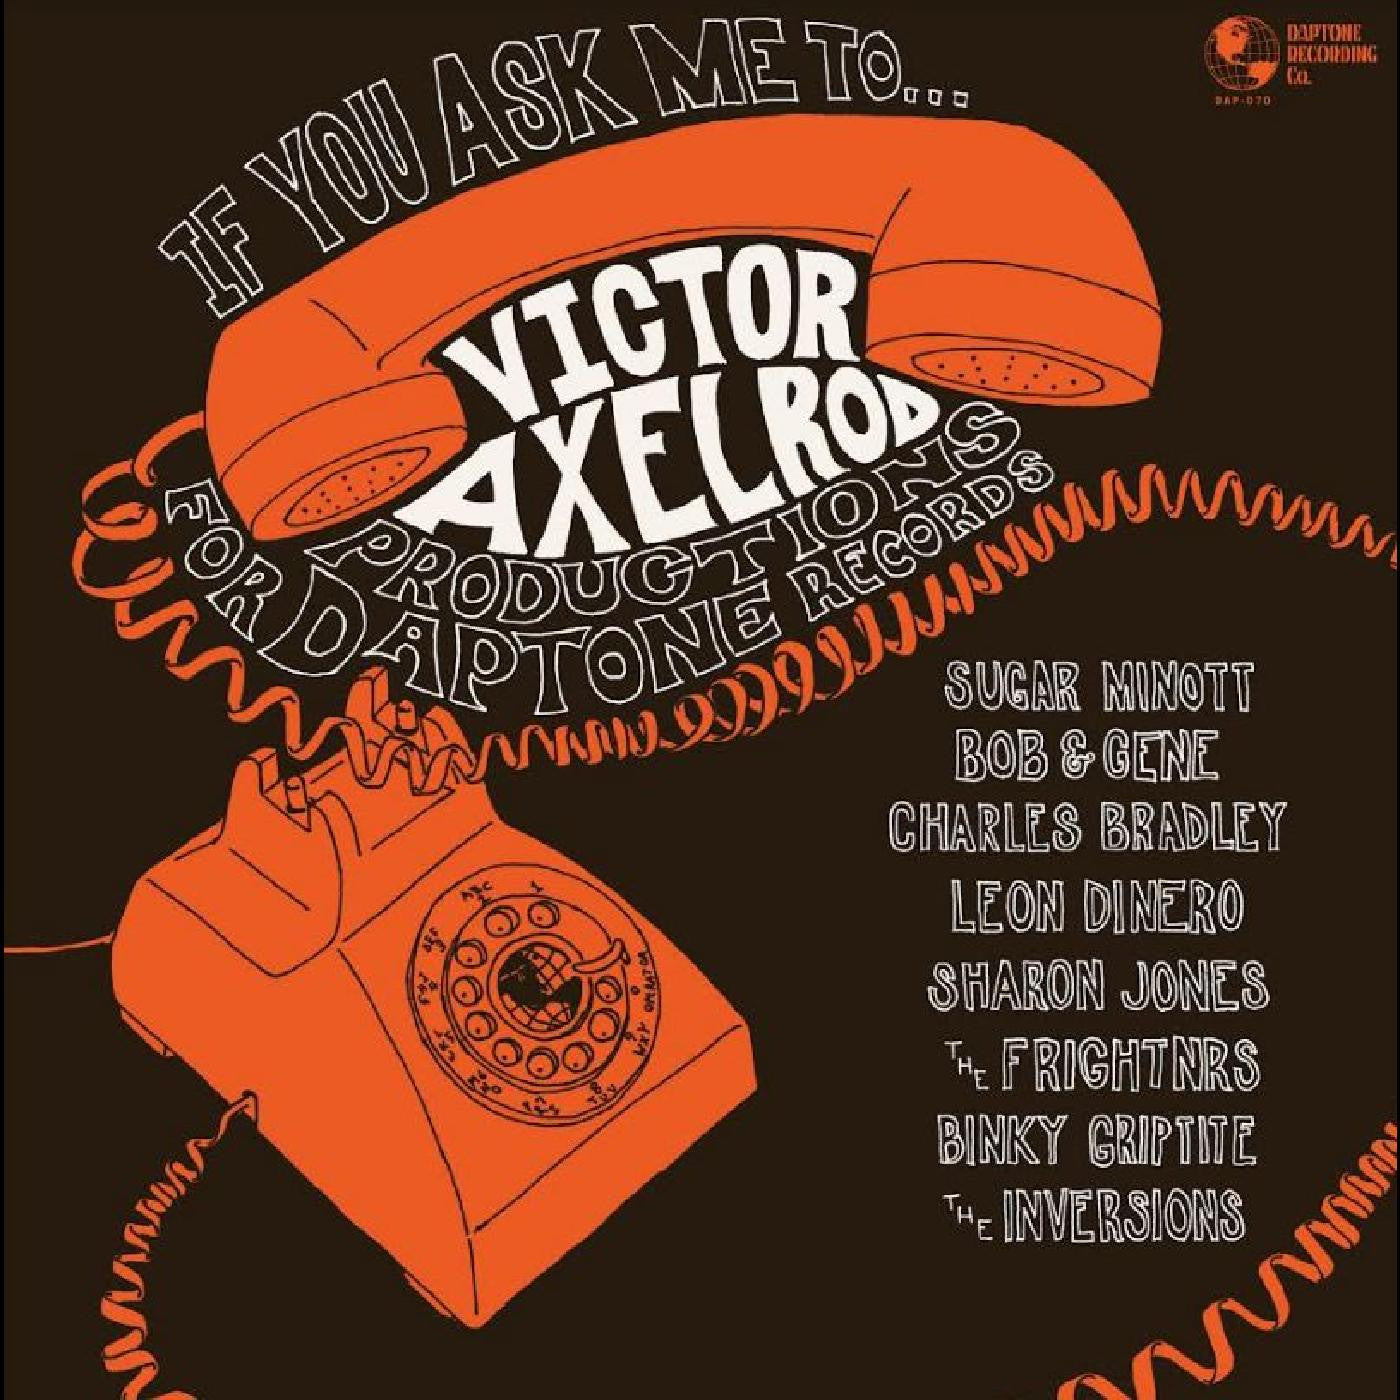 VICTOR AXELROD - IF YOU ASK ME TO Vinyl LP